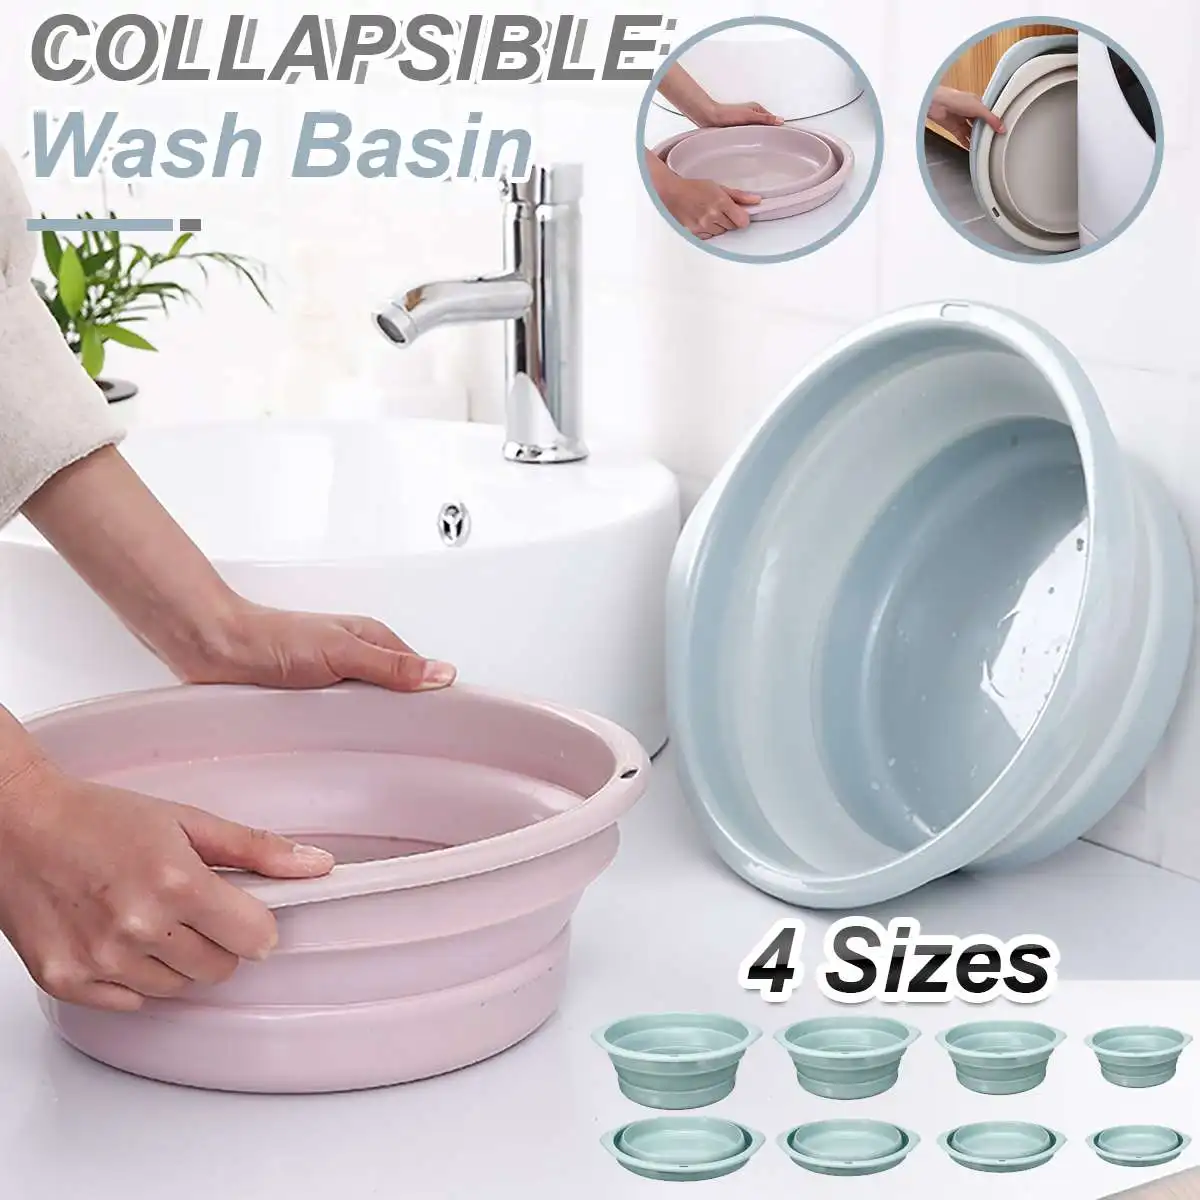 Details about   Portable Washbasin Bucket Folding Laundry Outdoor Camping Fishing Car Wash Tool